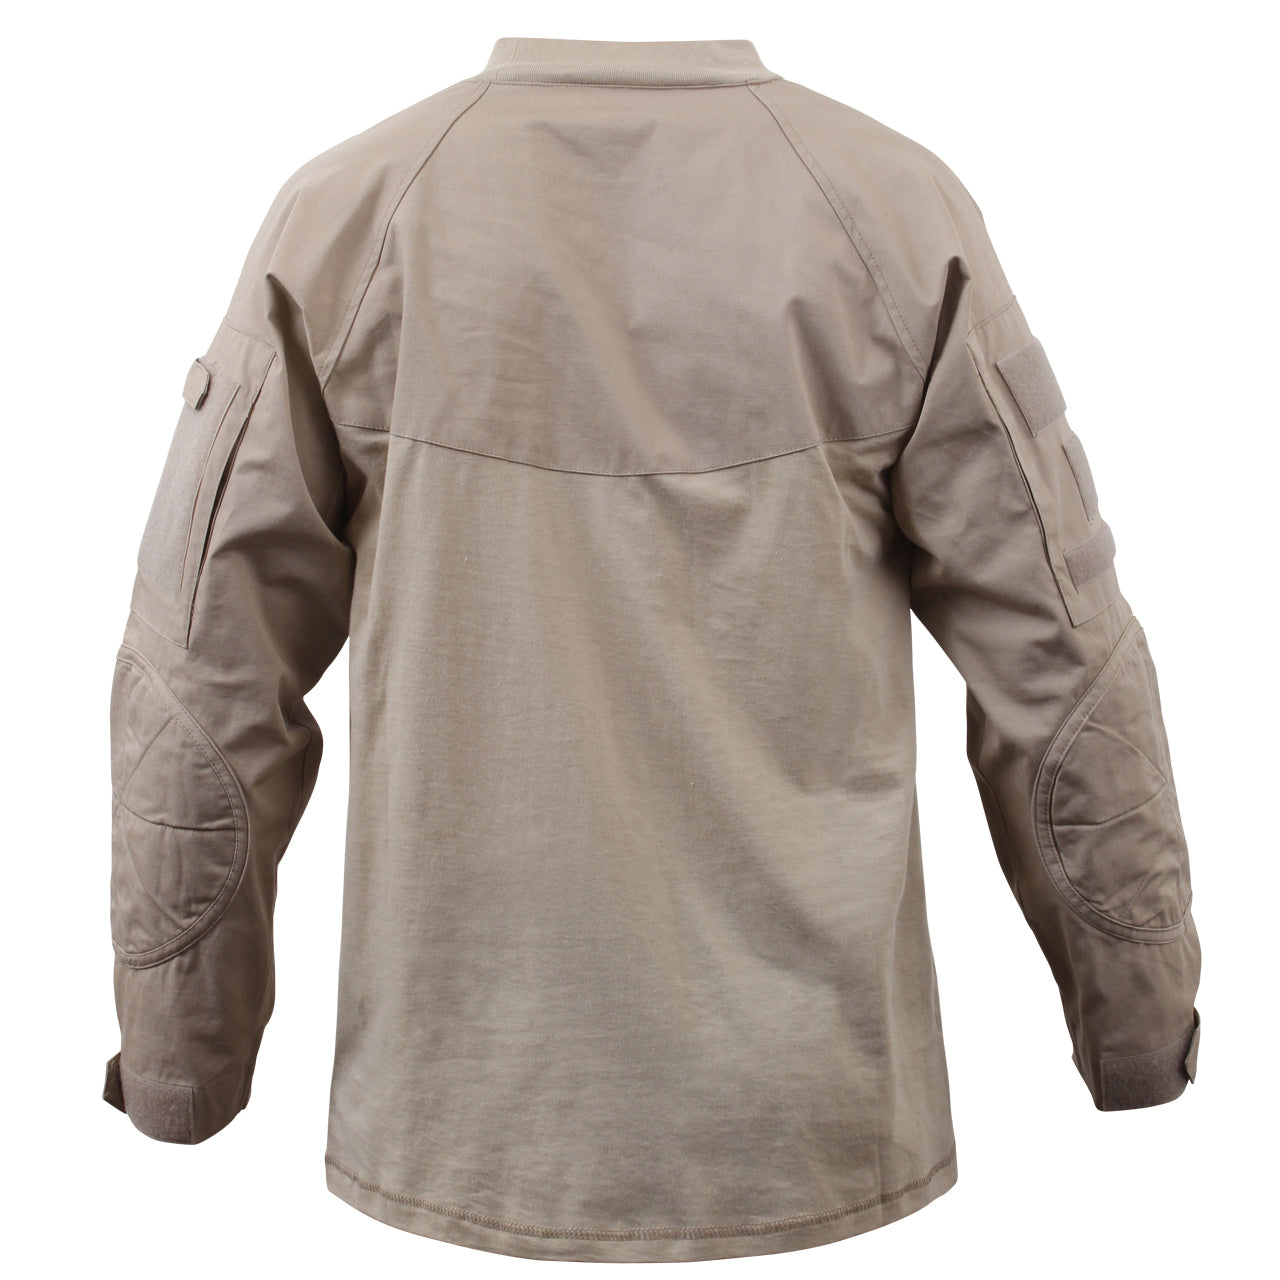 Rothco's Military Combat Shirts Are Made For Comfort But Worn For Protection. The Combat Shirt Is Perfect For Military And Tactical Personnel In The Field To Wear Under Hot, Heavy Body Armor And Tactical Vests. www.defenceqstore.com.au